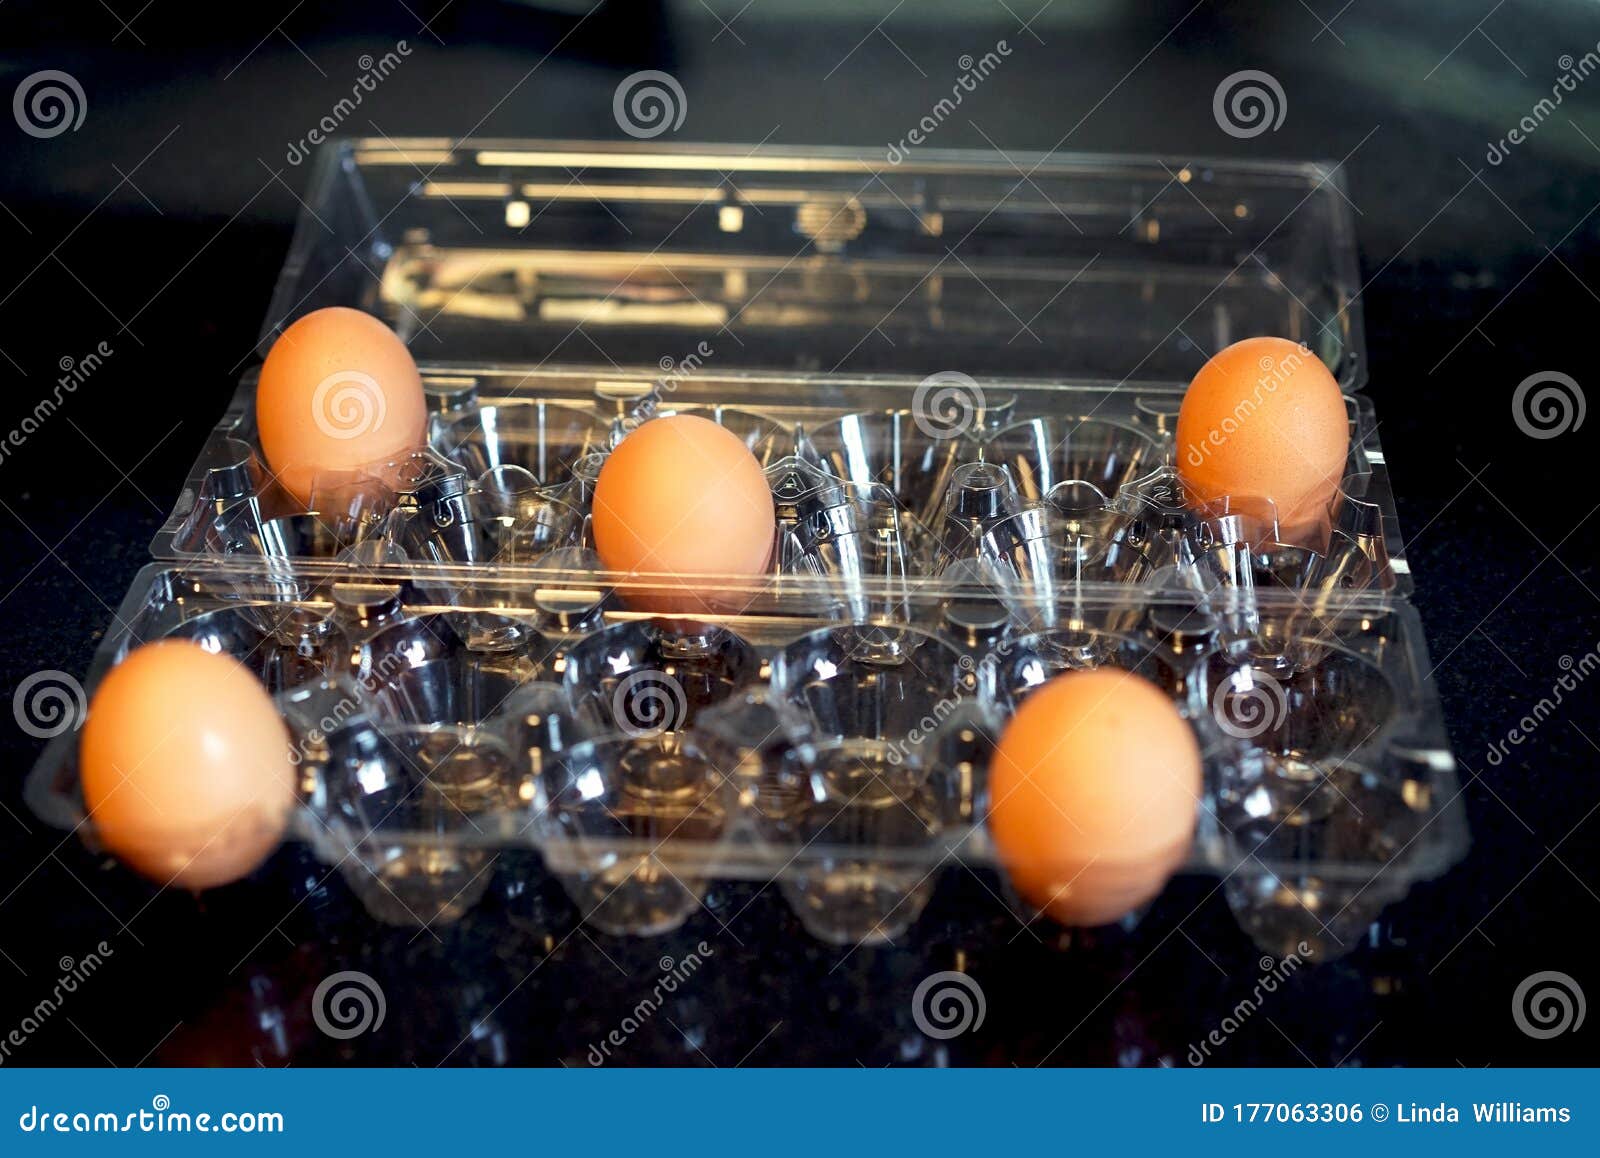 everyday social distancing - eggs